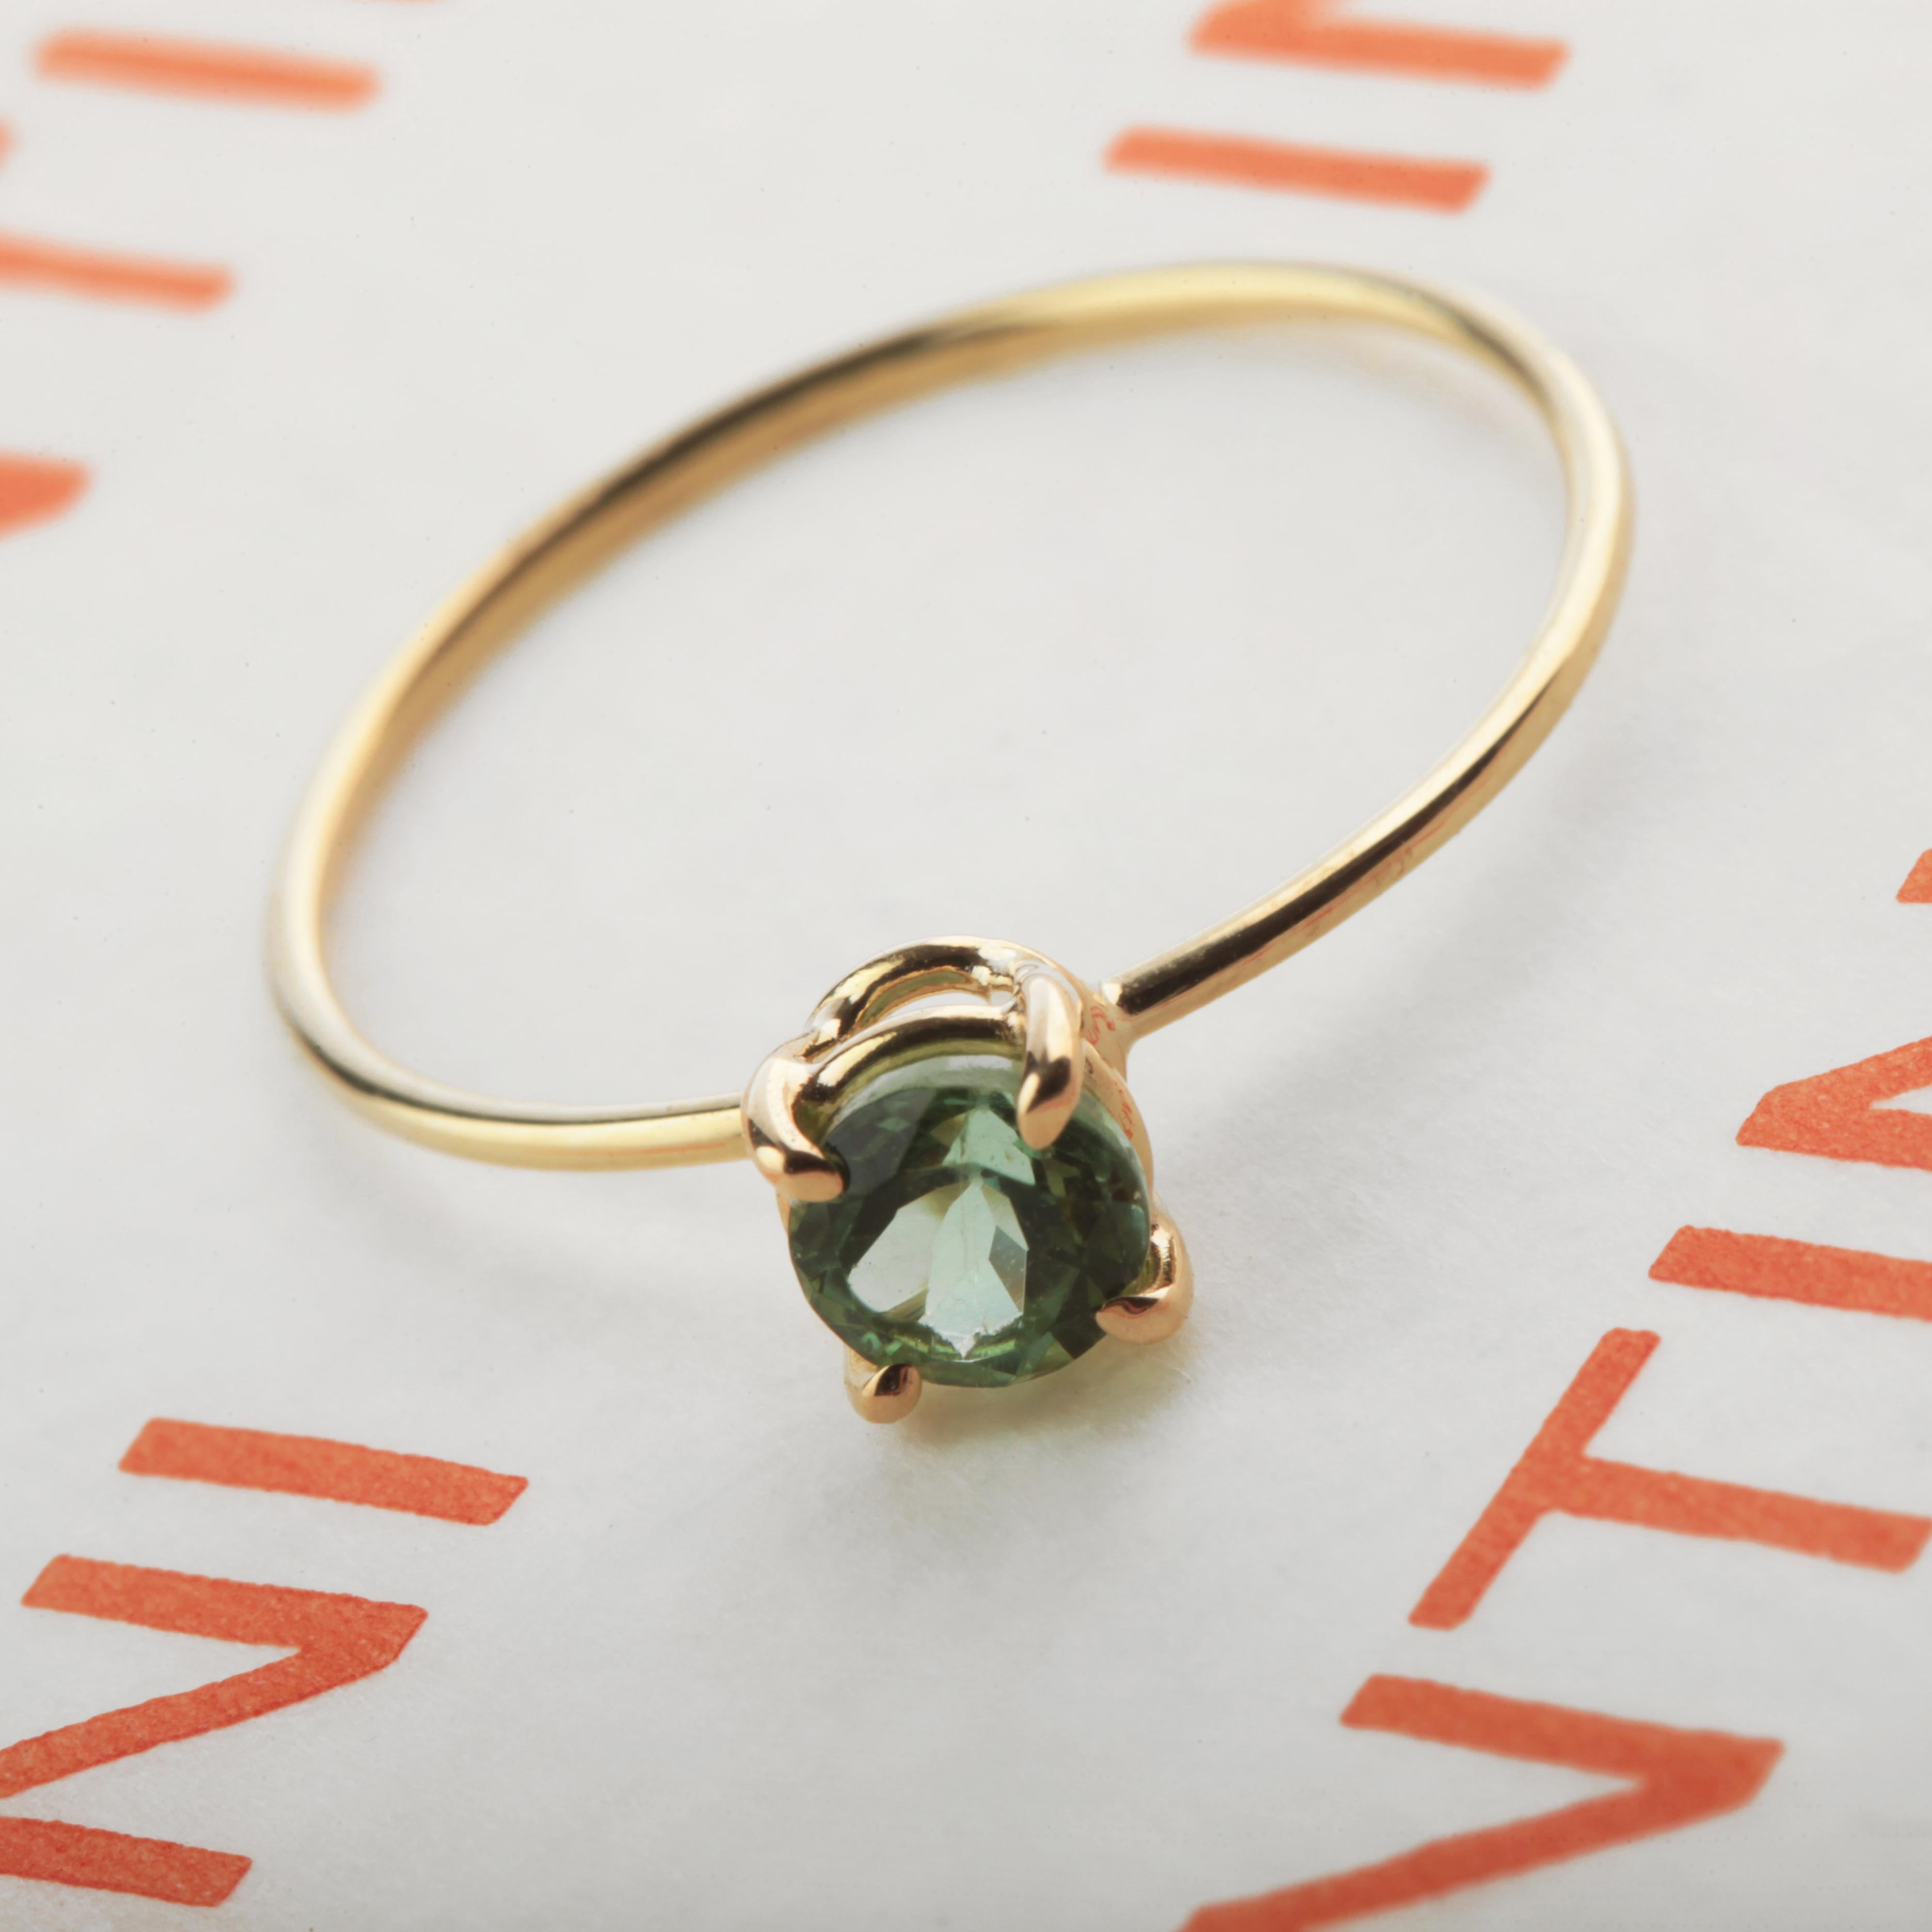 Signature INTINI Jewels green tourmaline jewellery. Modern and elegant ring design in 18k yellow gold with an brilliant cut with tiny griffes sormounting the ring.

Green Tourmaline is ideal for healing purposes, as it can focus its healing